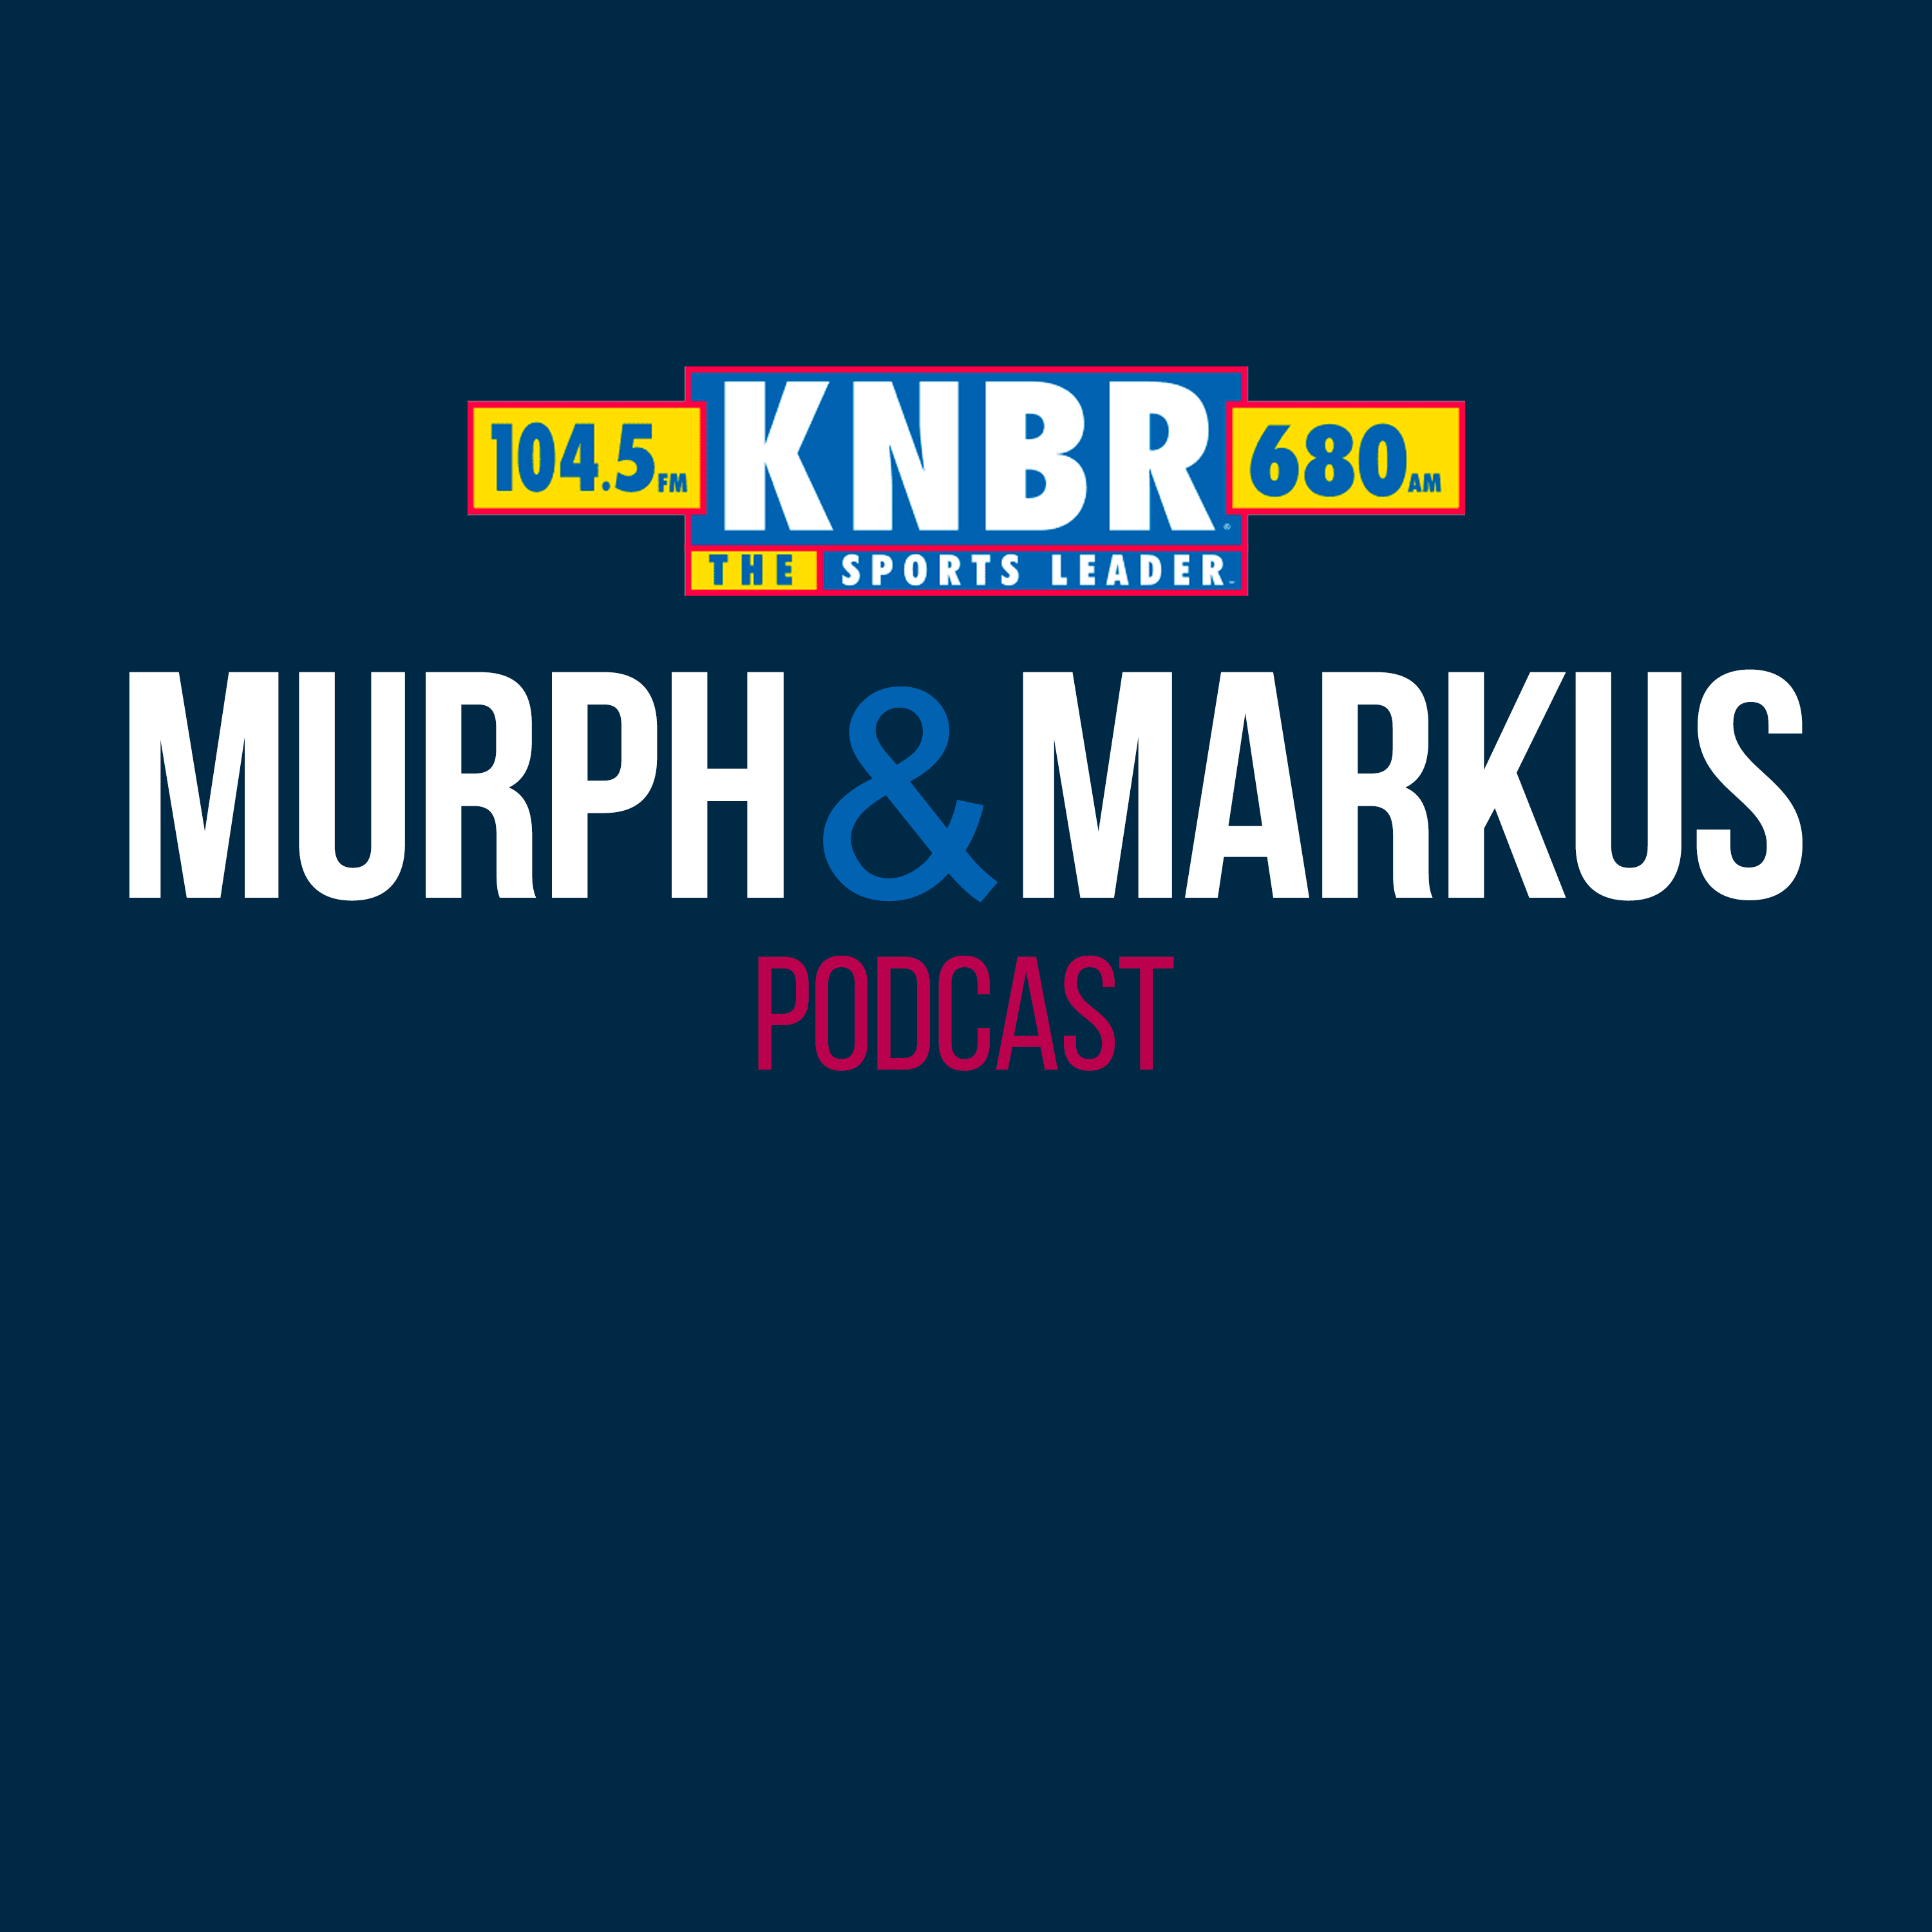 6-10 NFL Insider for ESPN, Jeremy Fowler joined Murph and Markus to discuss Brandon Aiyuk's contract situation and what's the latest with Trent Williams contract